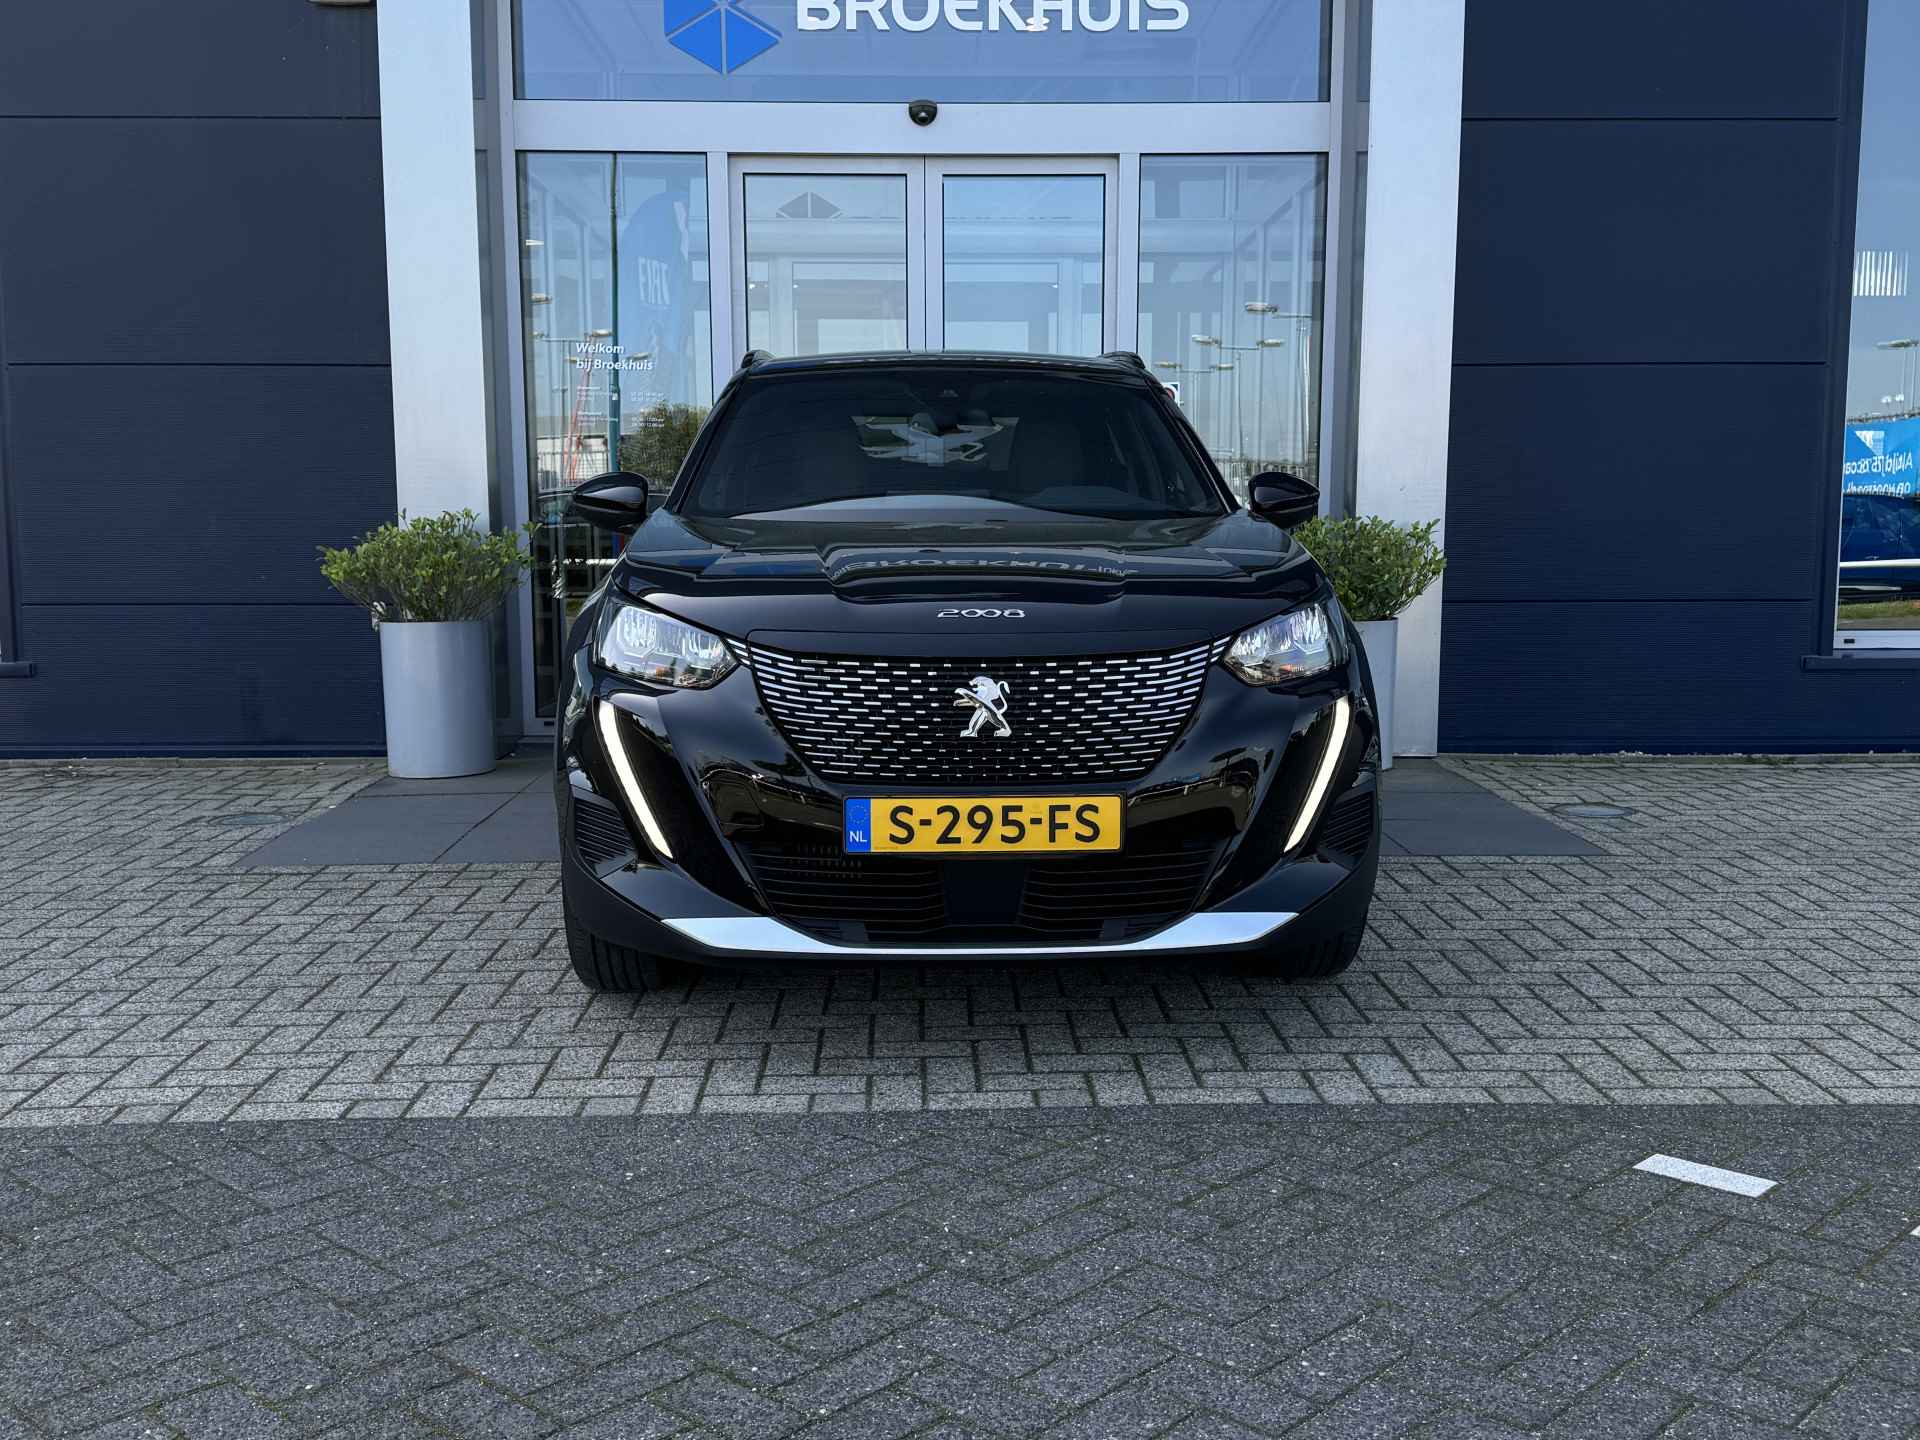 Peugeot 2008 1.2 100PK Allure | PDC achter | Climate Control | Cruise Control | Carplay - 7/29